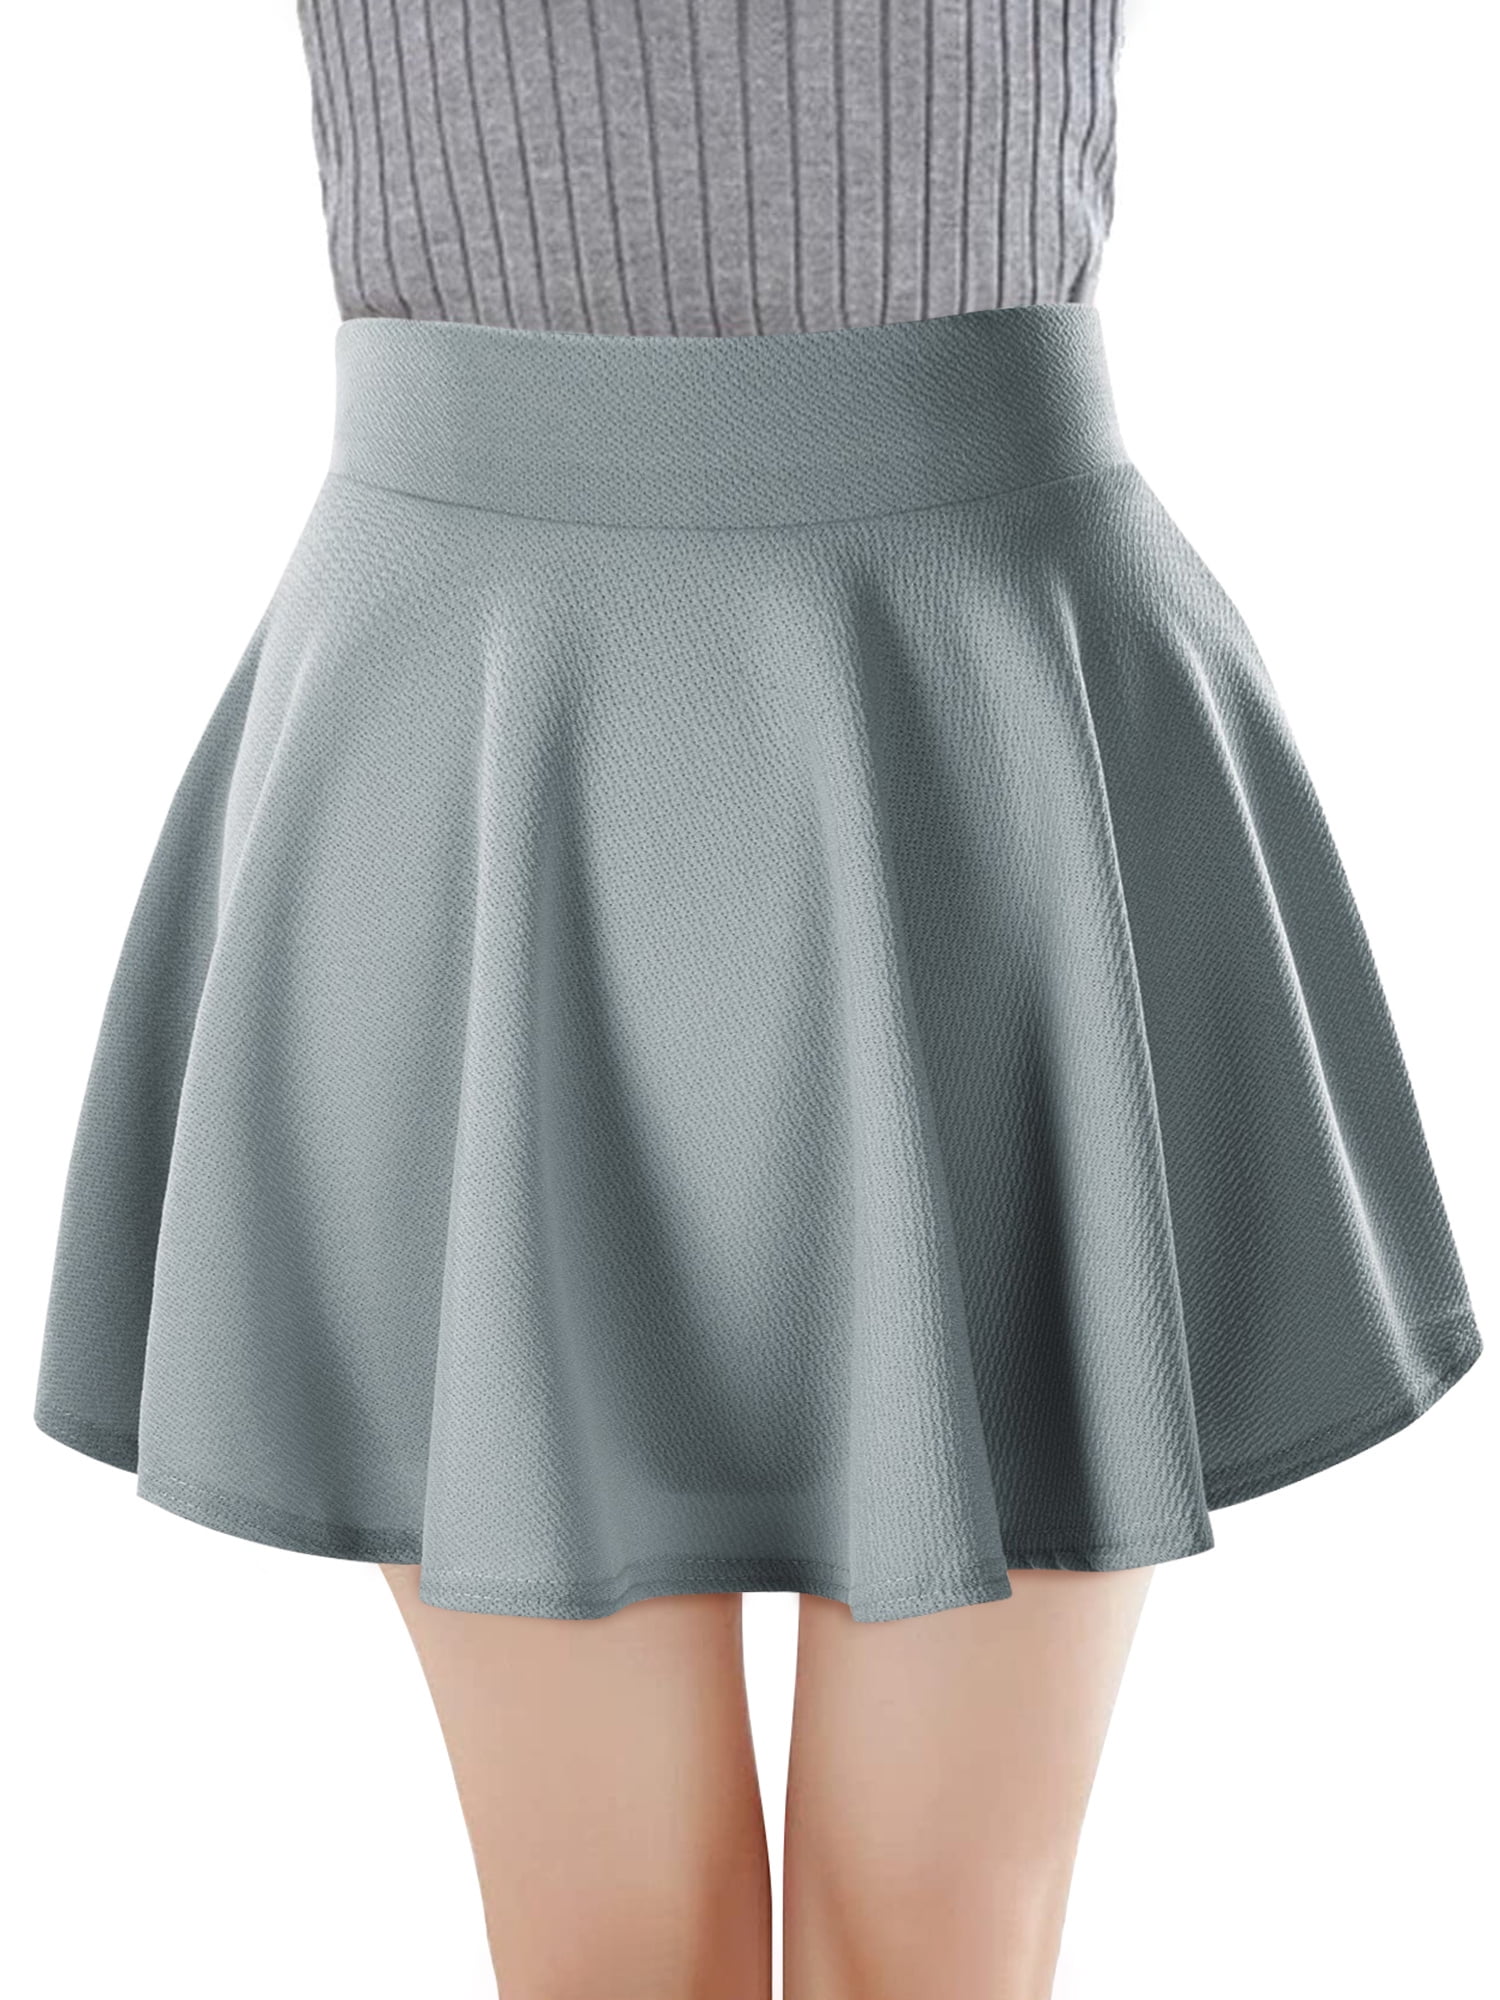 STARVNC Women Solid Color Stretchy Pleated Mini Skirt - Walmart.com